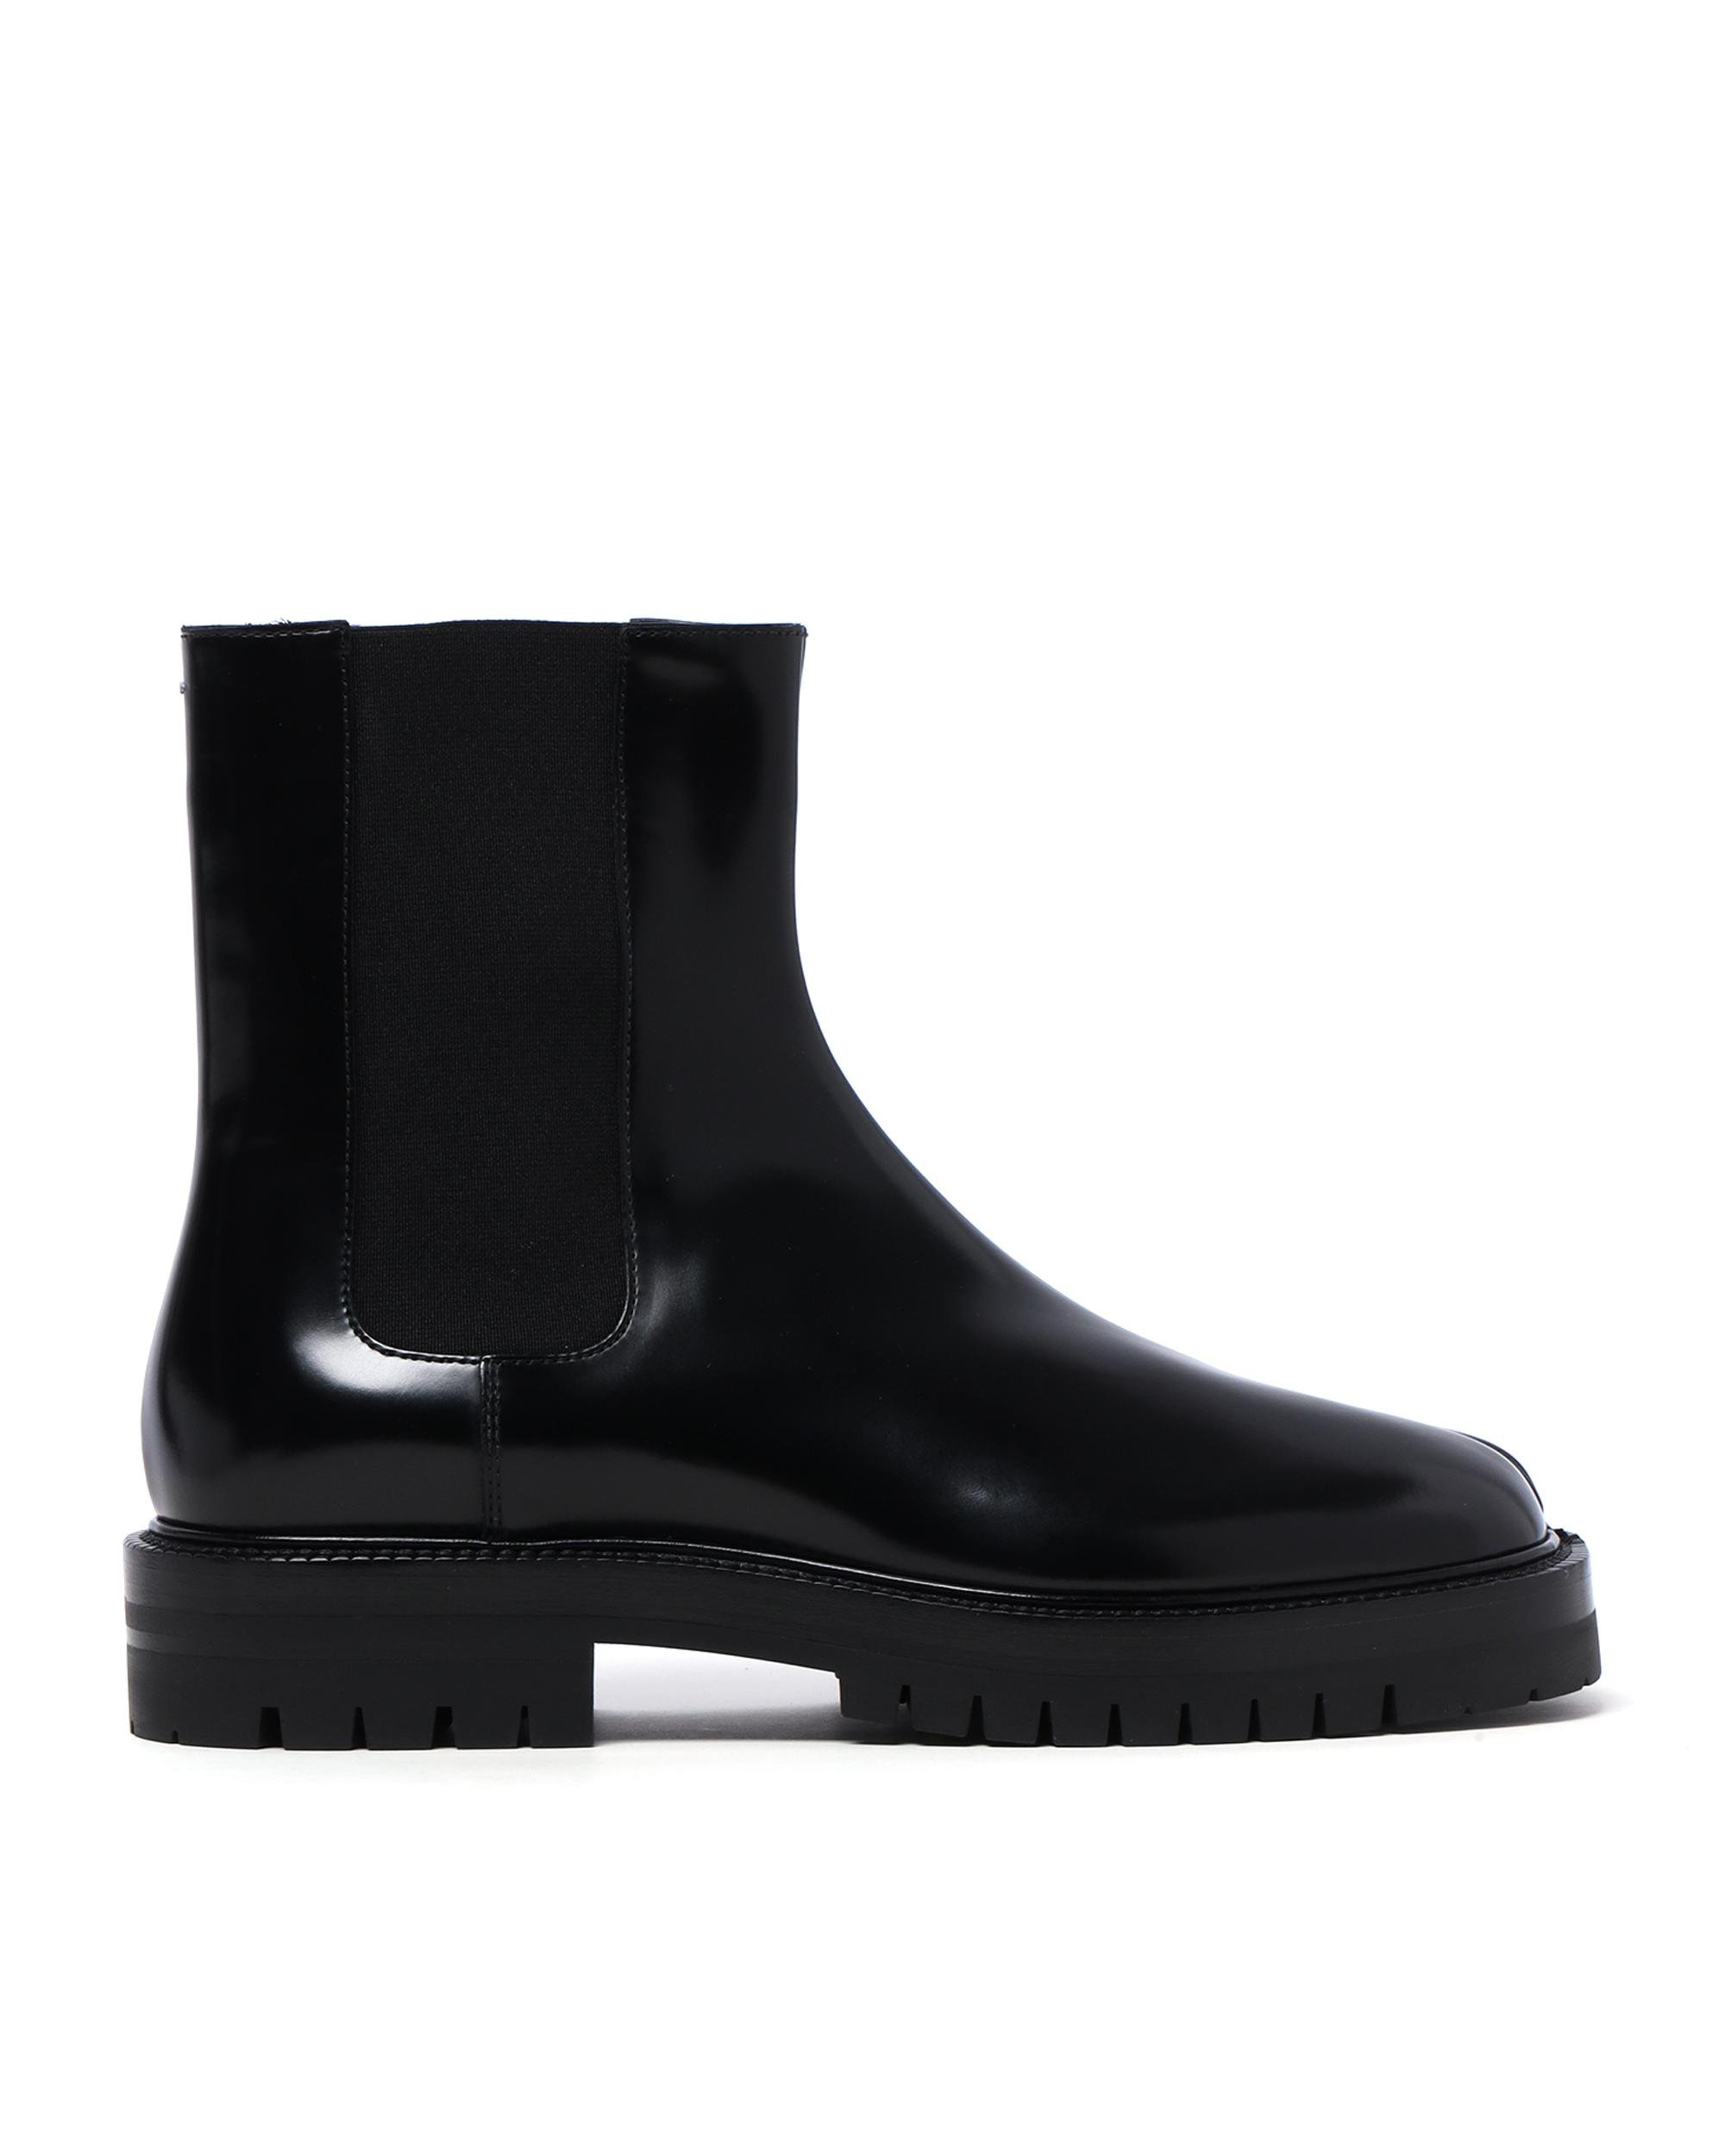 Tabi country Chelsea boots by MAISON MARGIELA